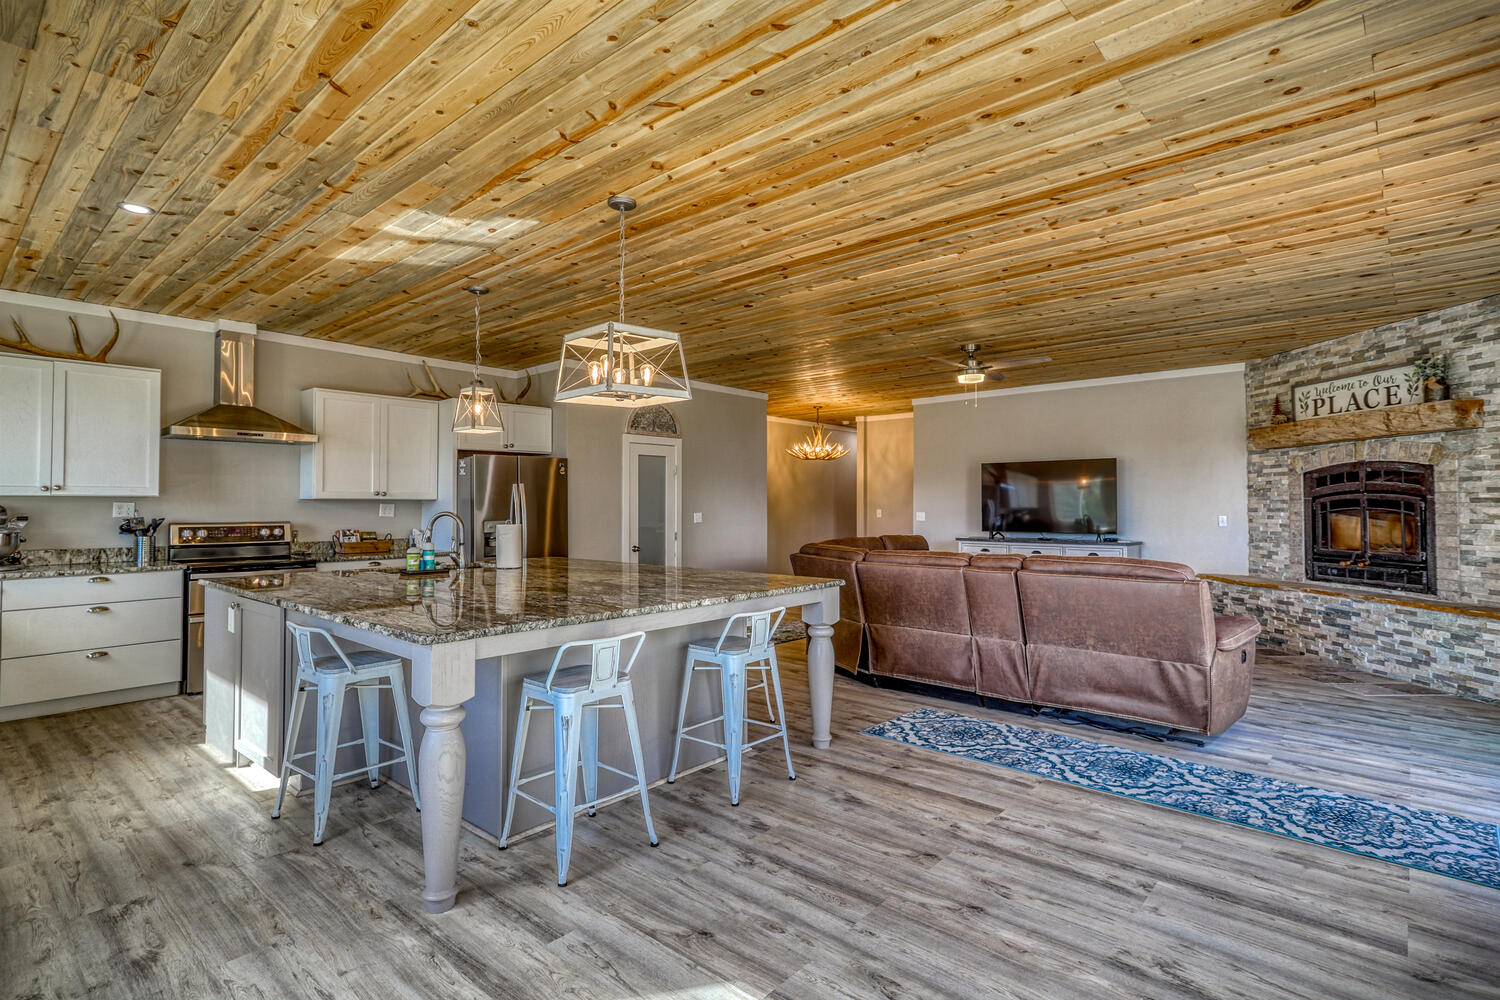 Open-concept kitchen and living room in vacation rental with great mountain views by A River Runs Thru It